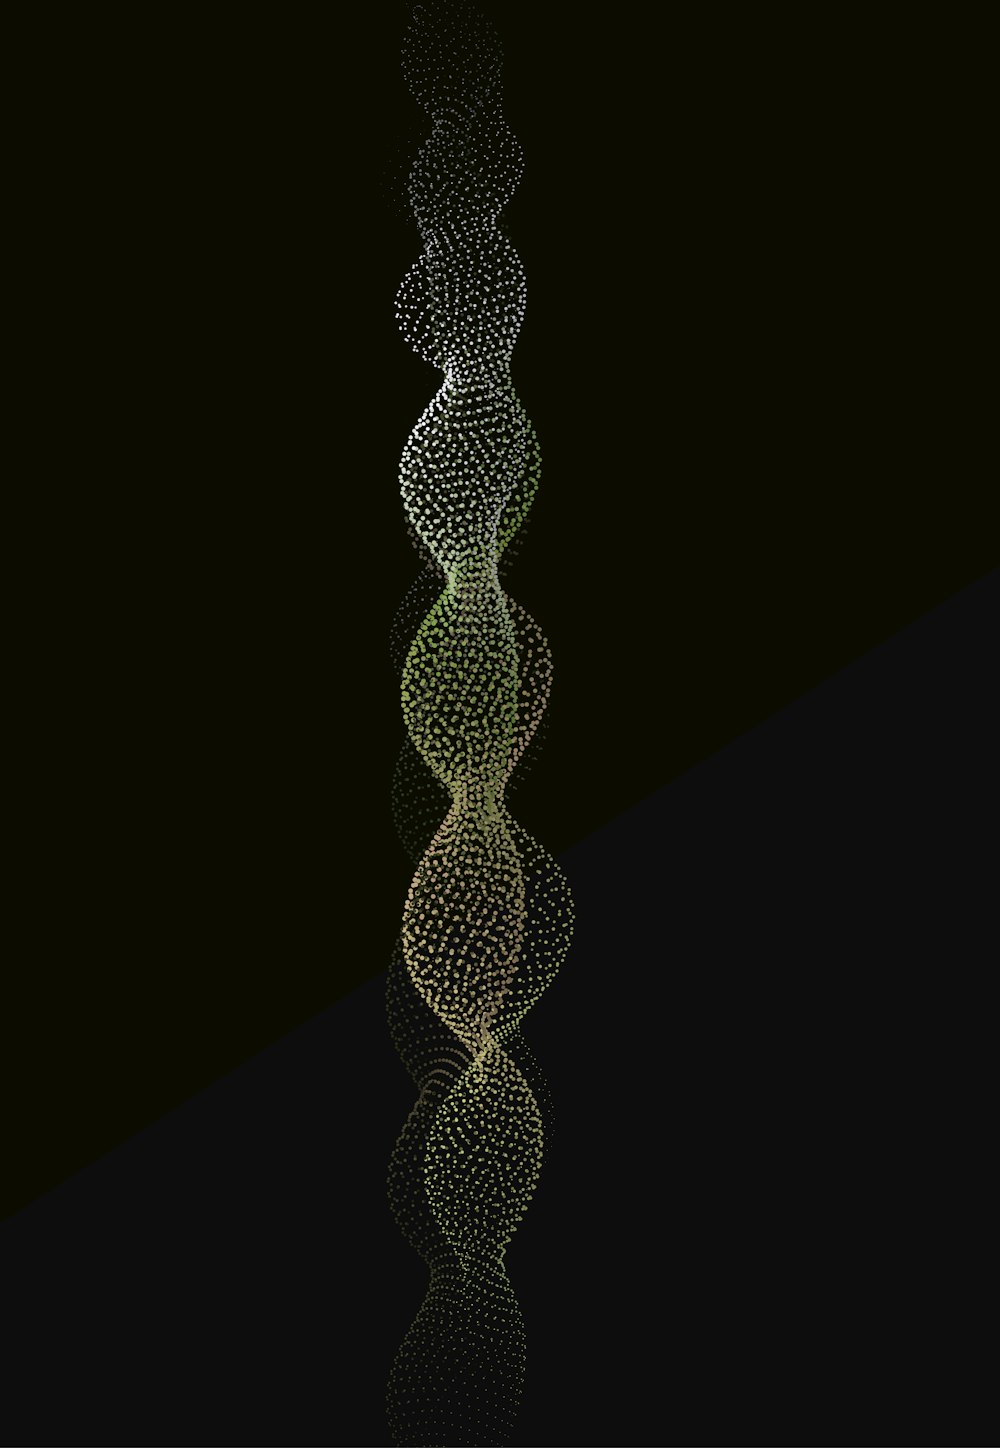 an abstract image of a spiral of dots on a black background